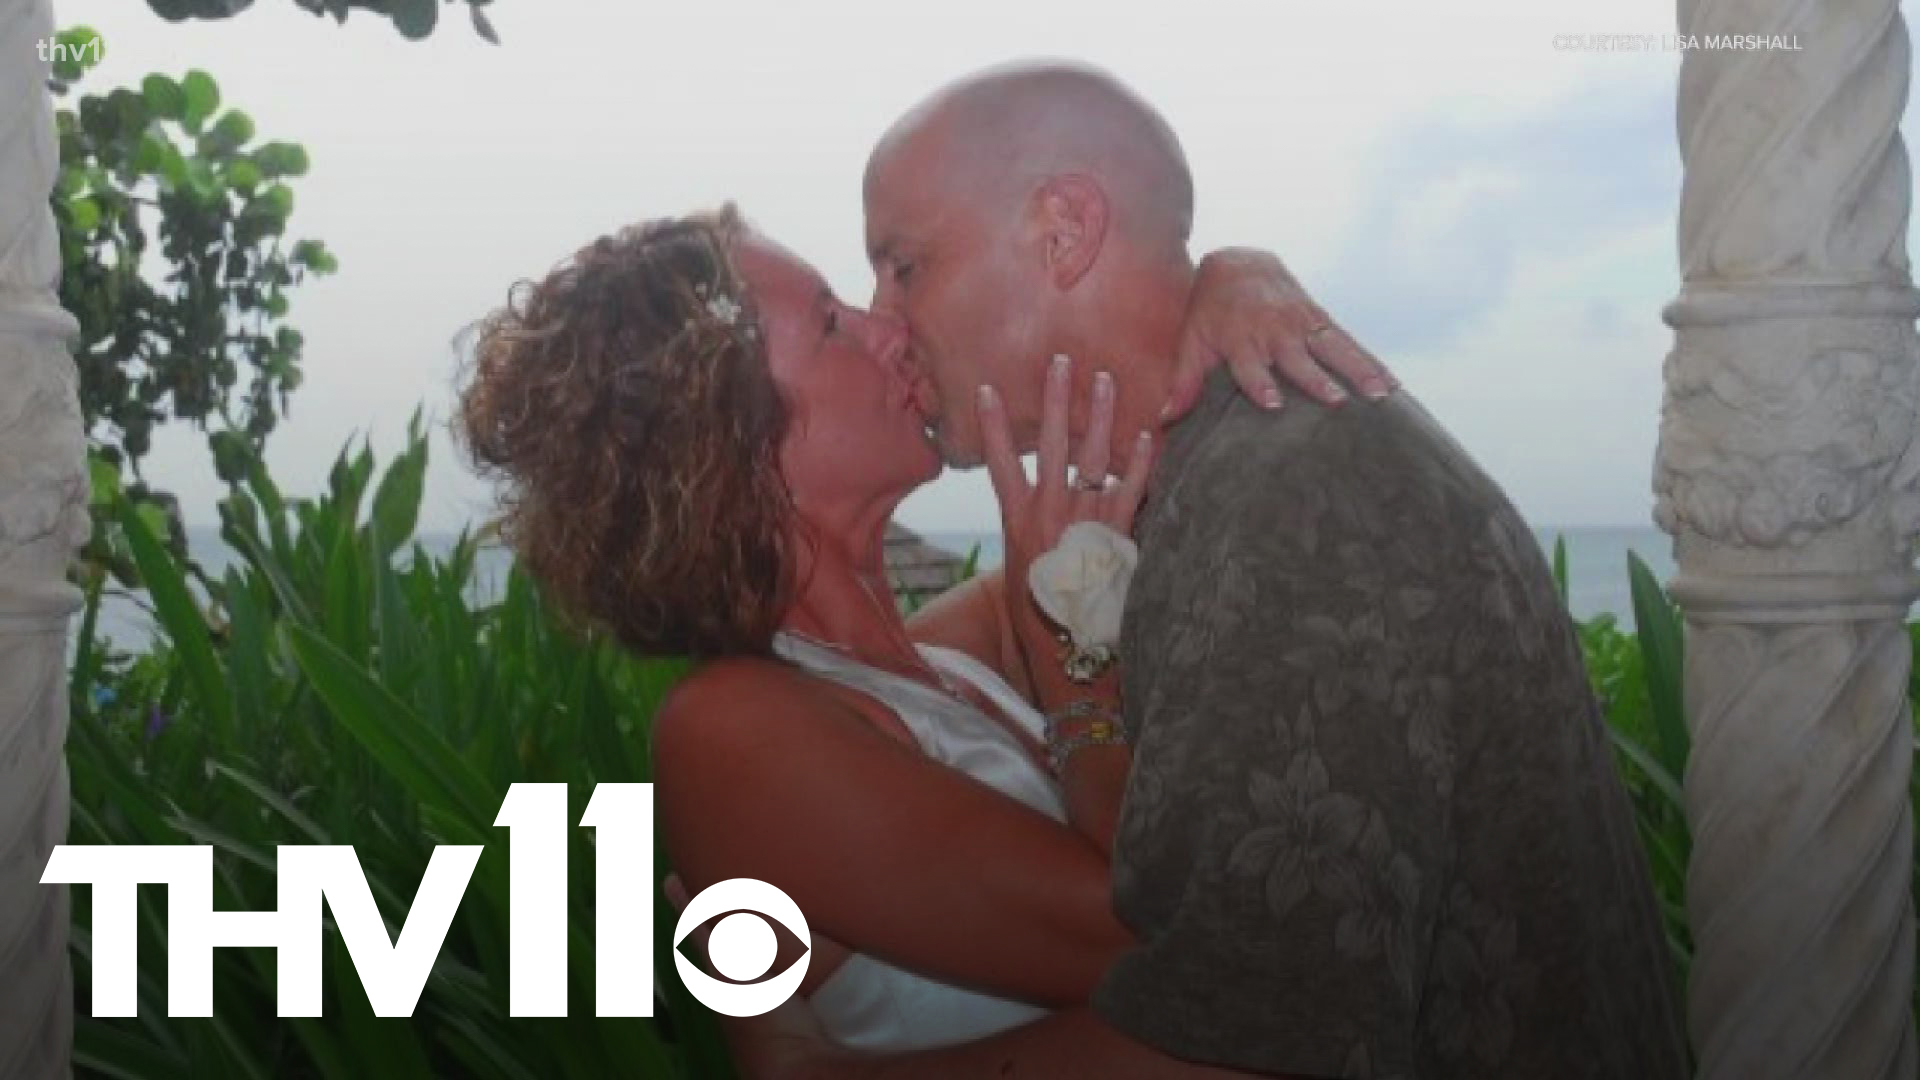 A couple in Connecticut recently renewed their vows, which is a common occurrence, but this one is a little different.